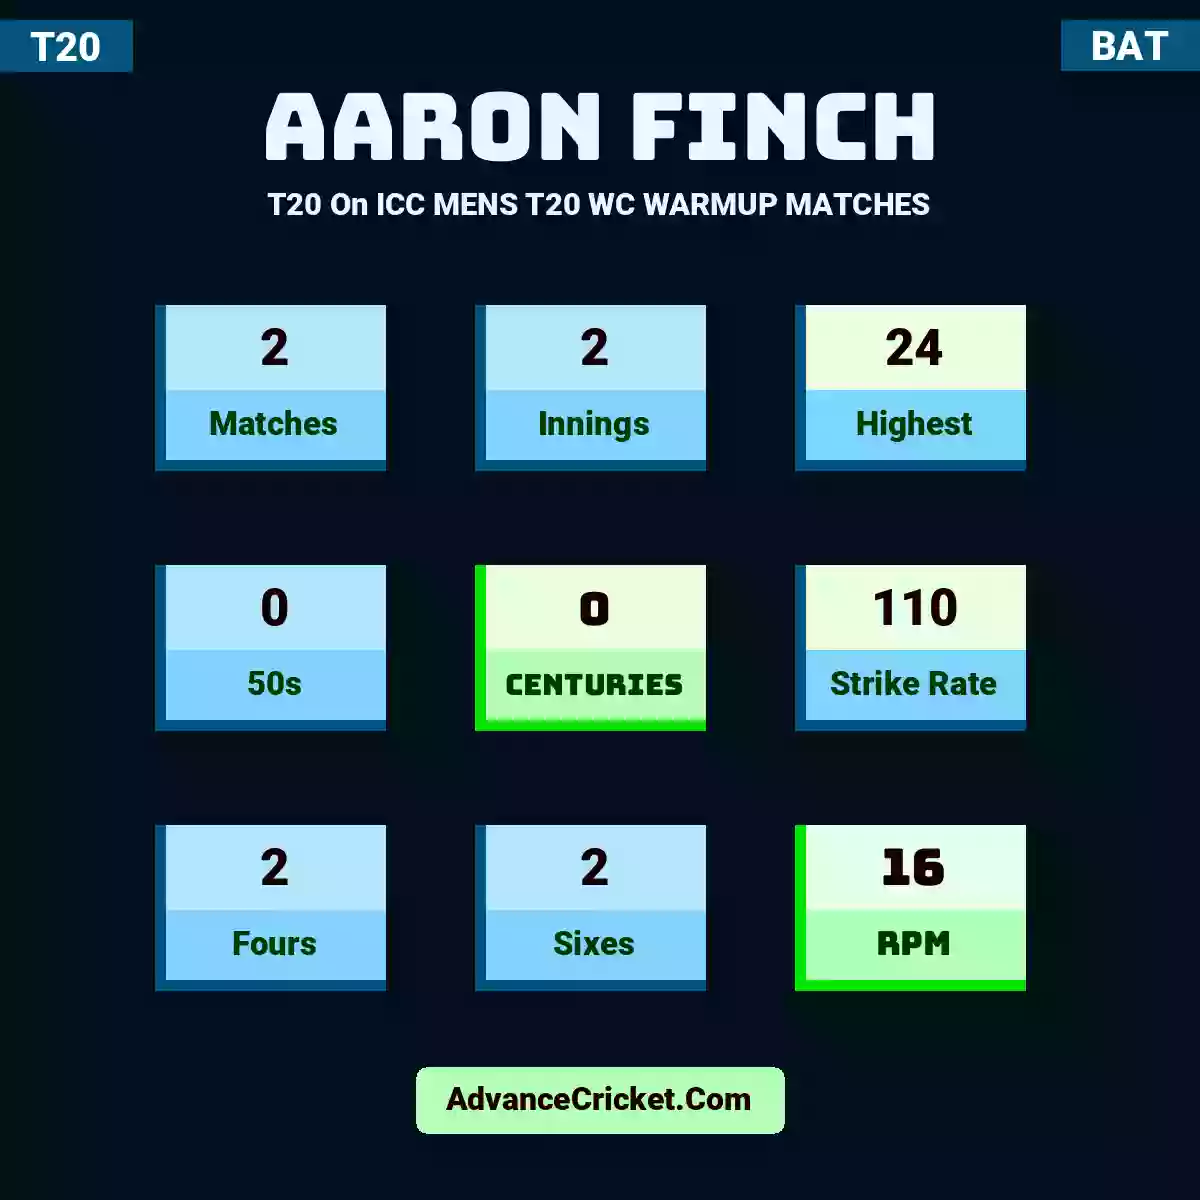 Aaron Finch T20  On ICC MENS T20 WC WARMUP MATCHES, Aaron Finch played 2 matches, scored 24 runs as highest, 0 half-centuries, and 0 centuries, with a strike rate of 110. A.Finch hit 2 fours and 2 sixes, with an RPM of 16.